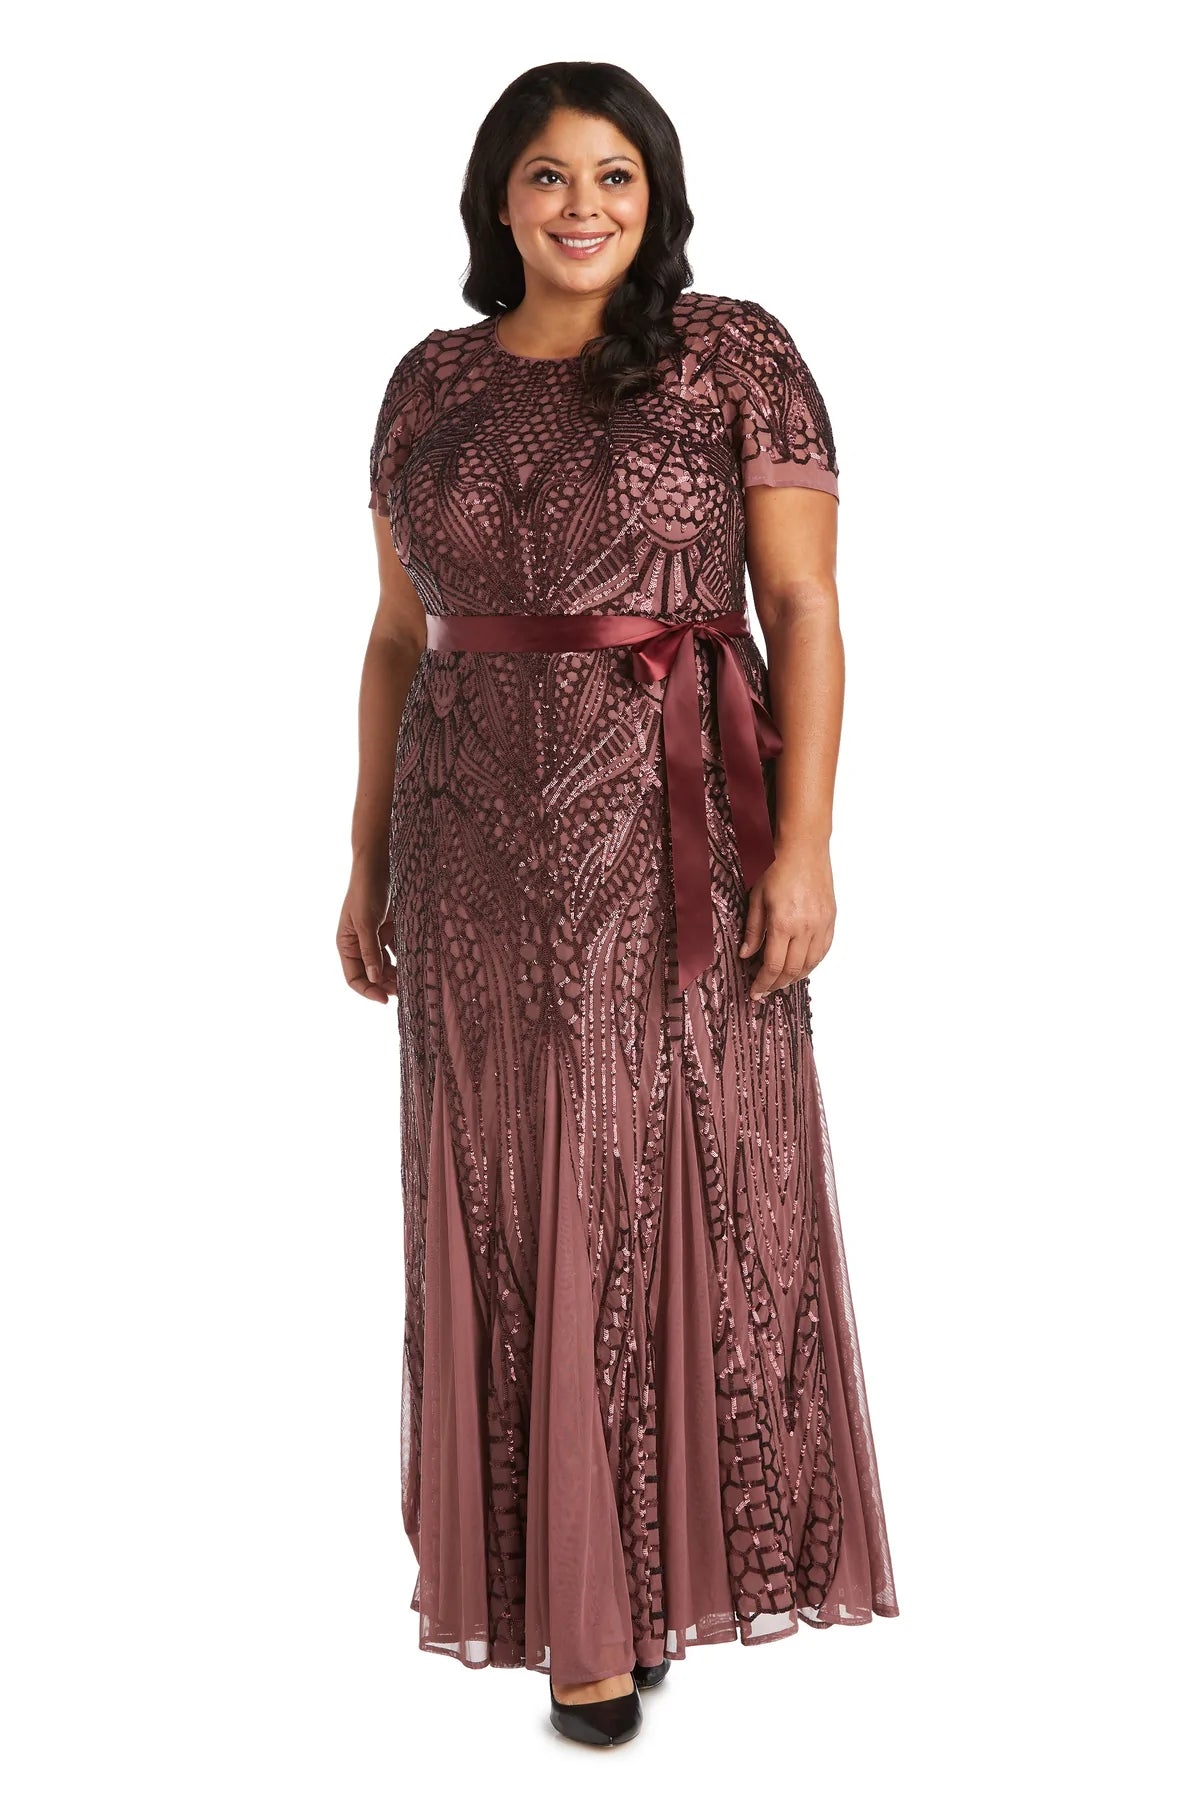 Buy Ethnic Plus Size Clothing for Women Online in India | Libas